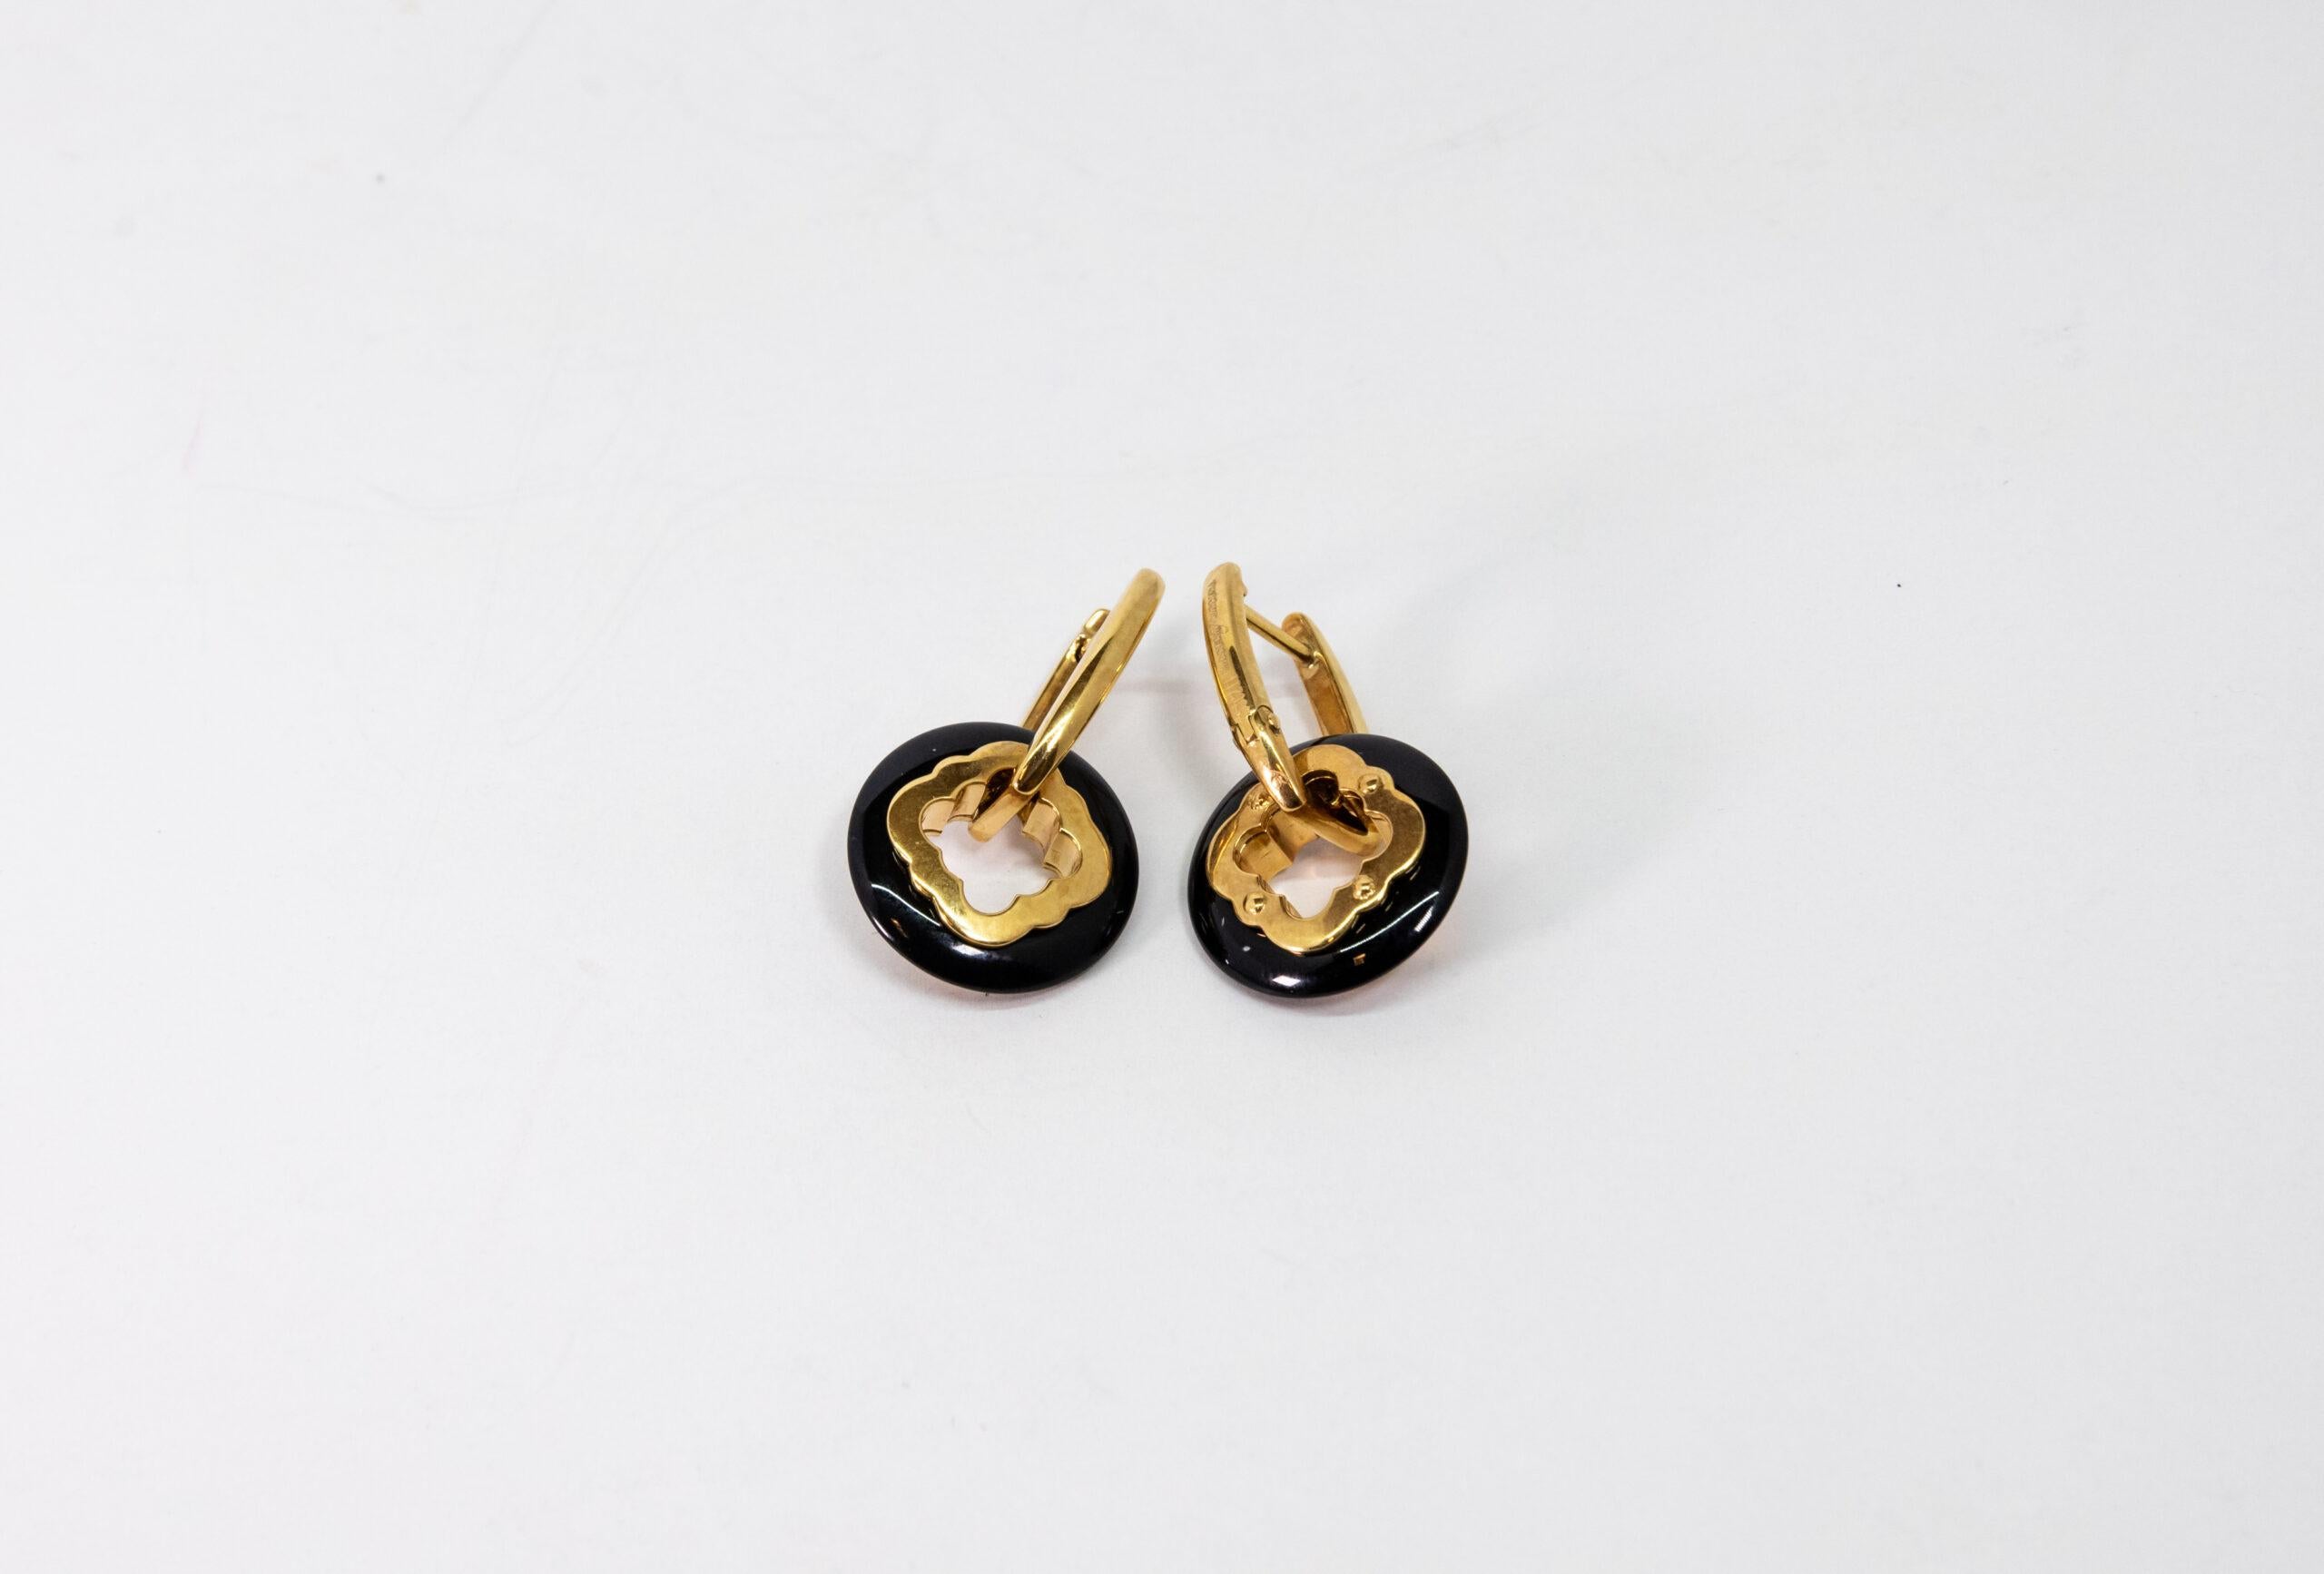 This 18K Yellow Gold English lock earring. Hoops are made of black Onyx with 18K Yellow Gold insert.

Dimensions: 2.8 cm x 1.7 cm